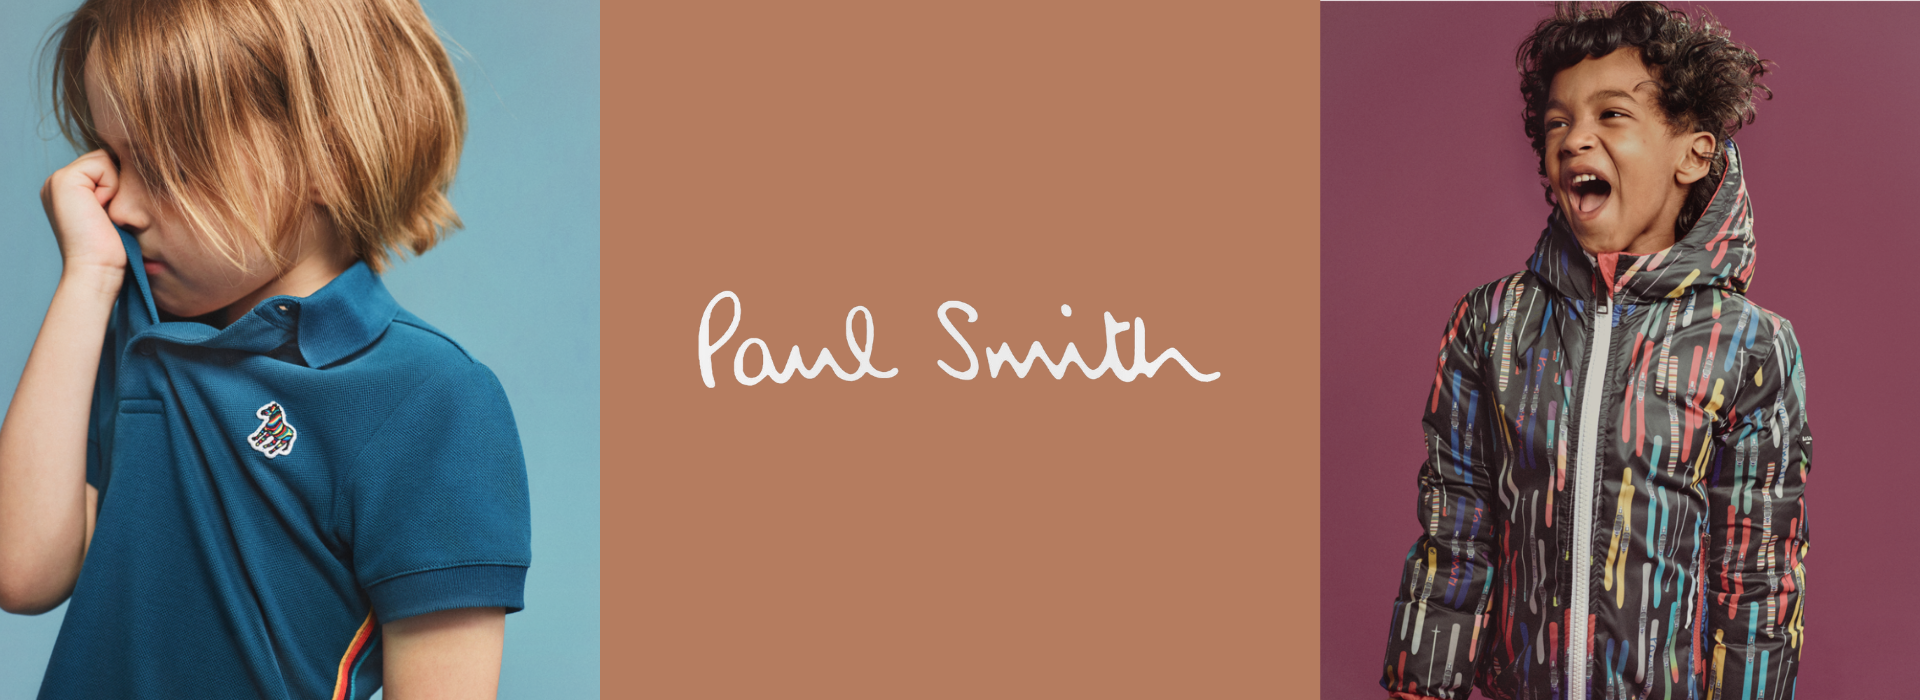 Paul Smith Kids Clothes